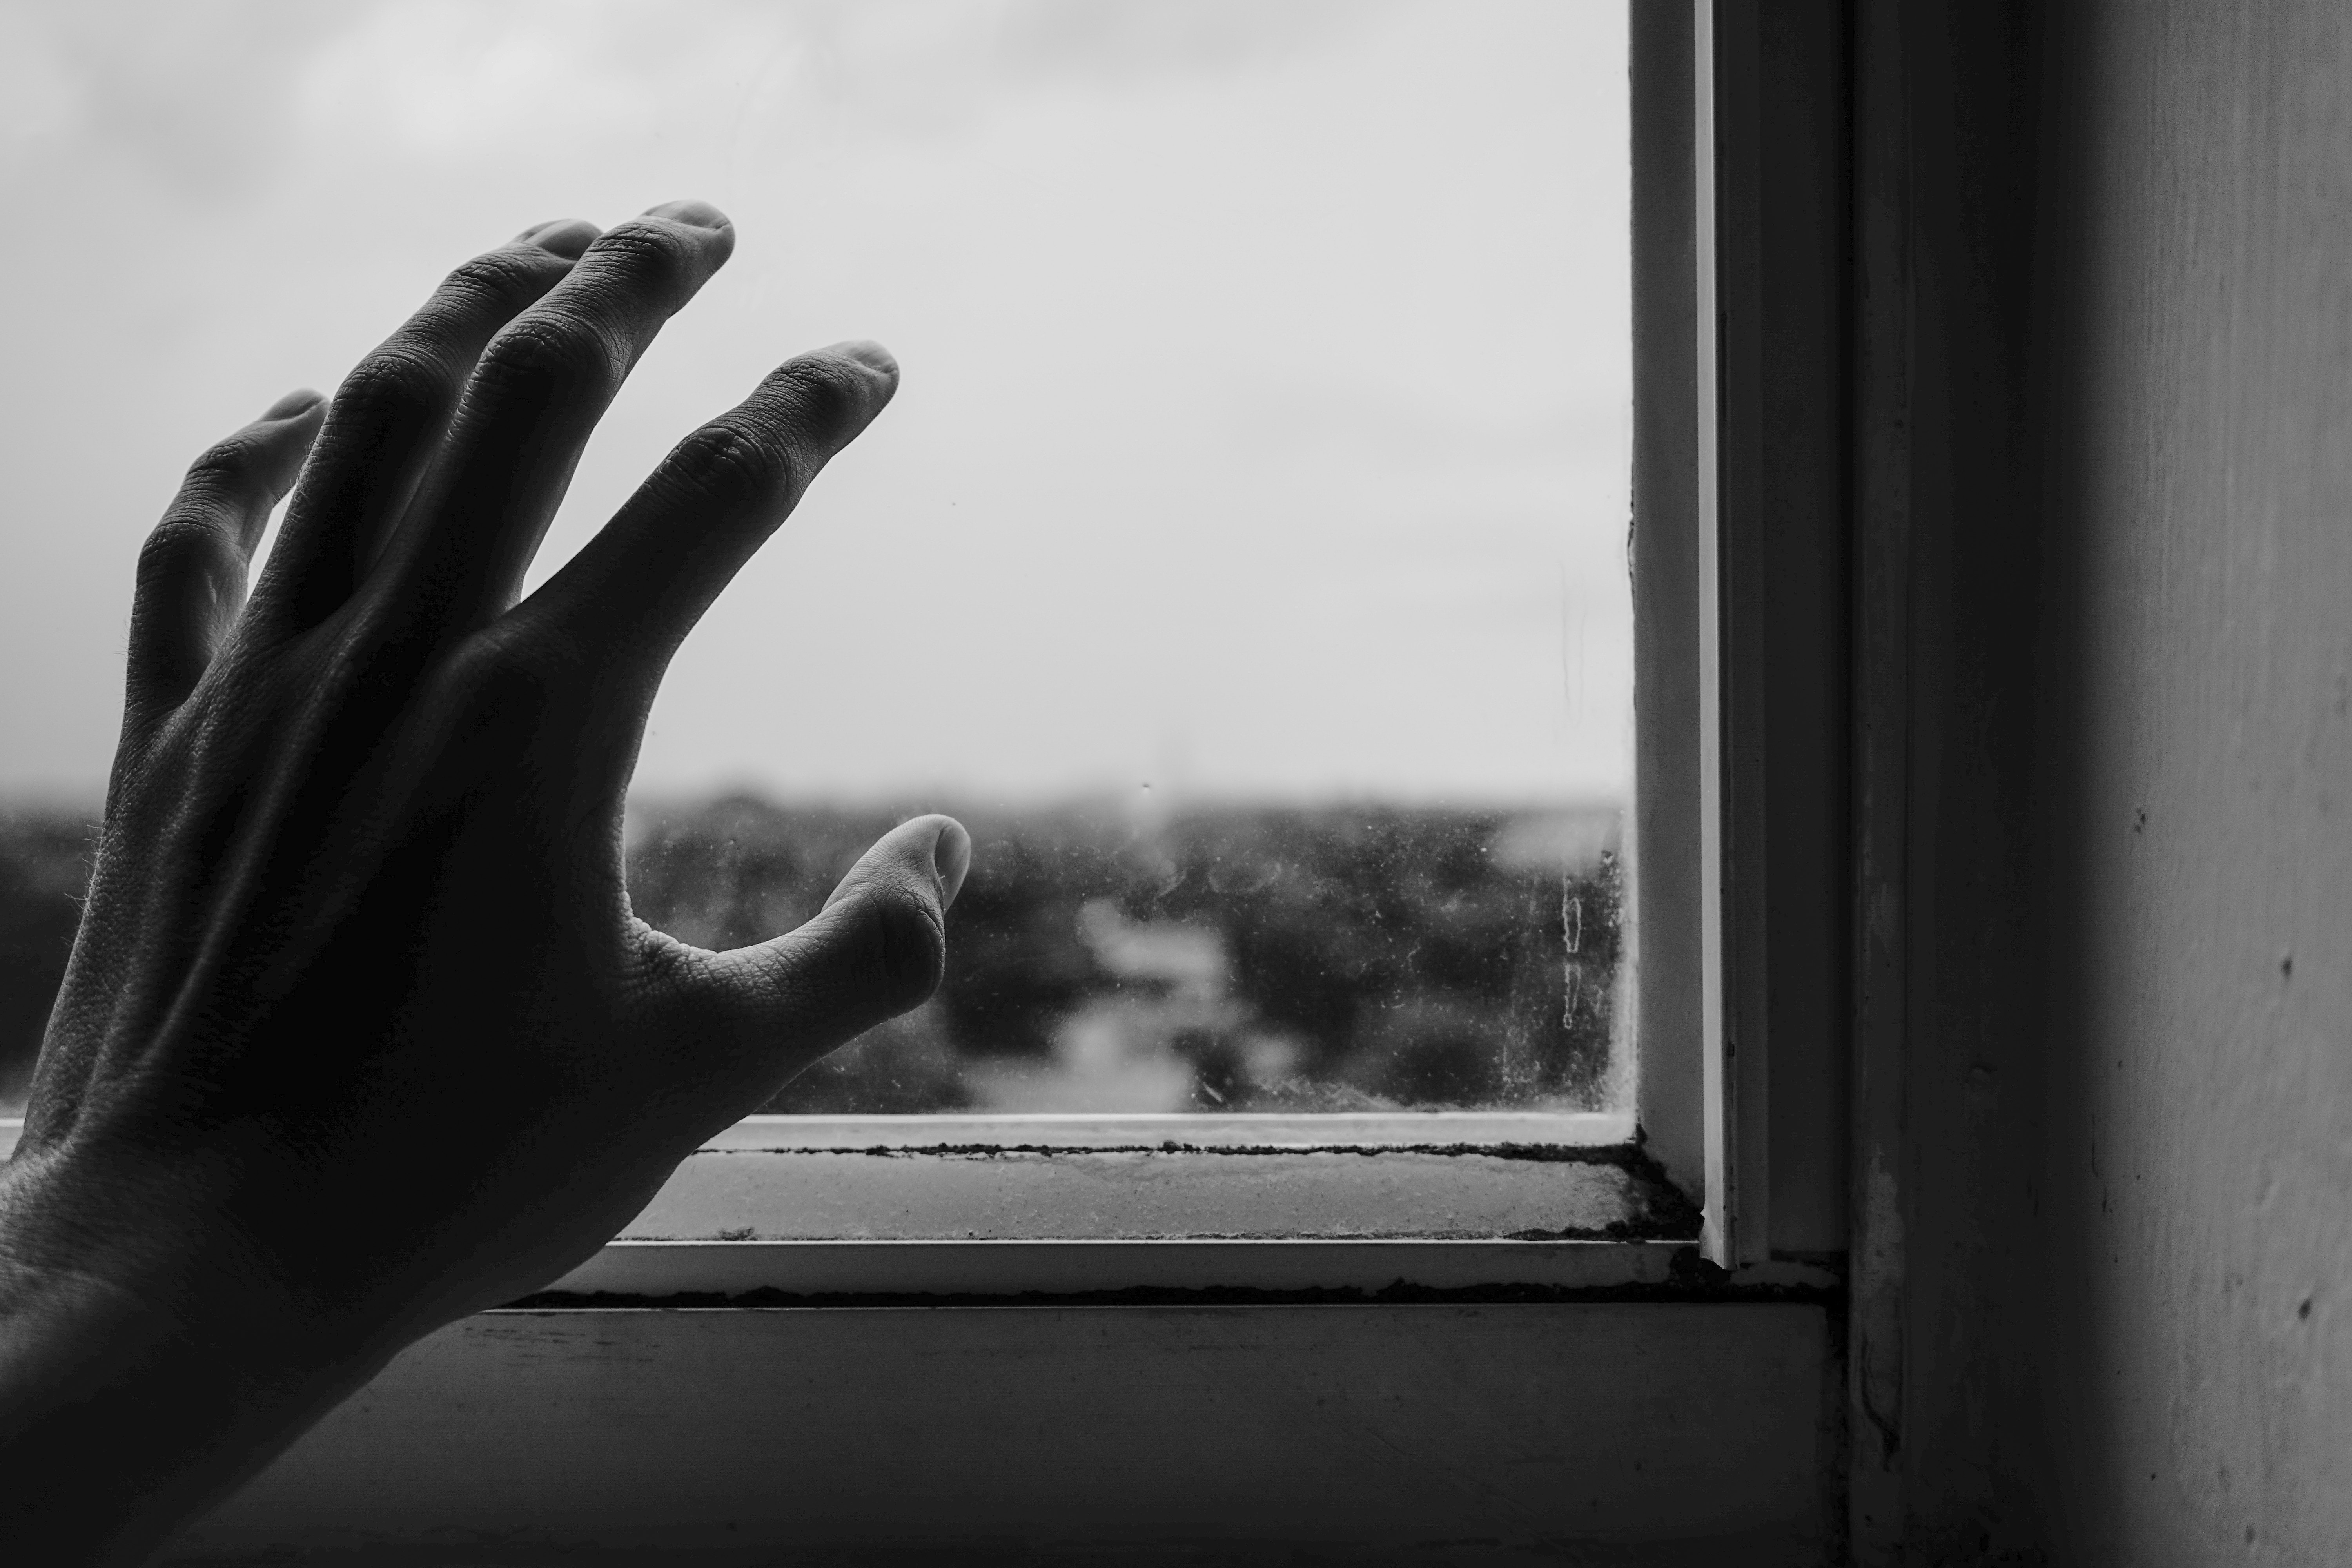 Sad Wallpaper With A Hand Trying To Touch A Window